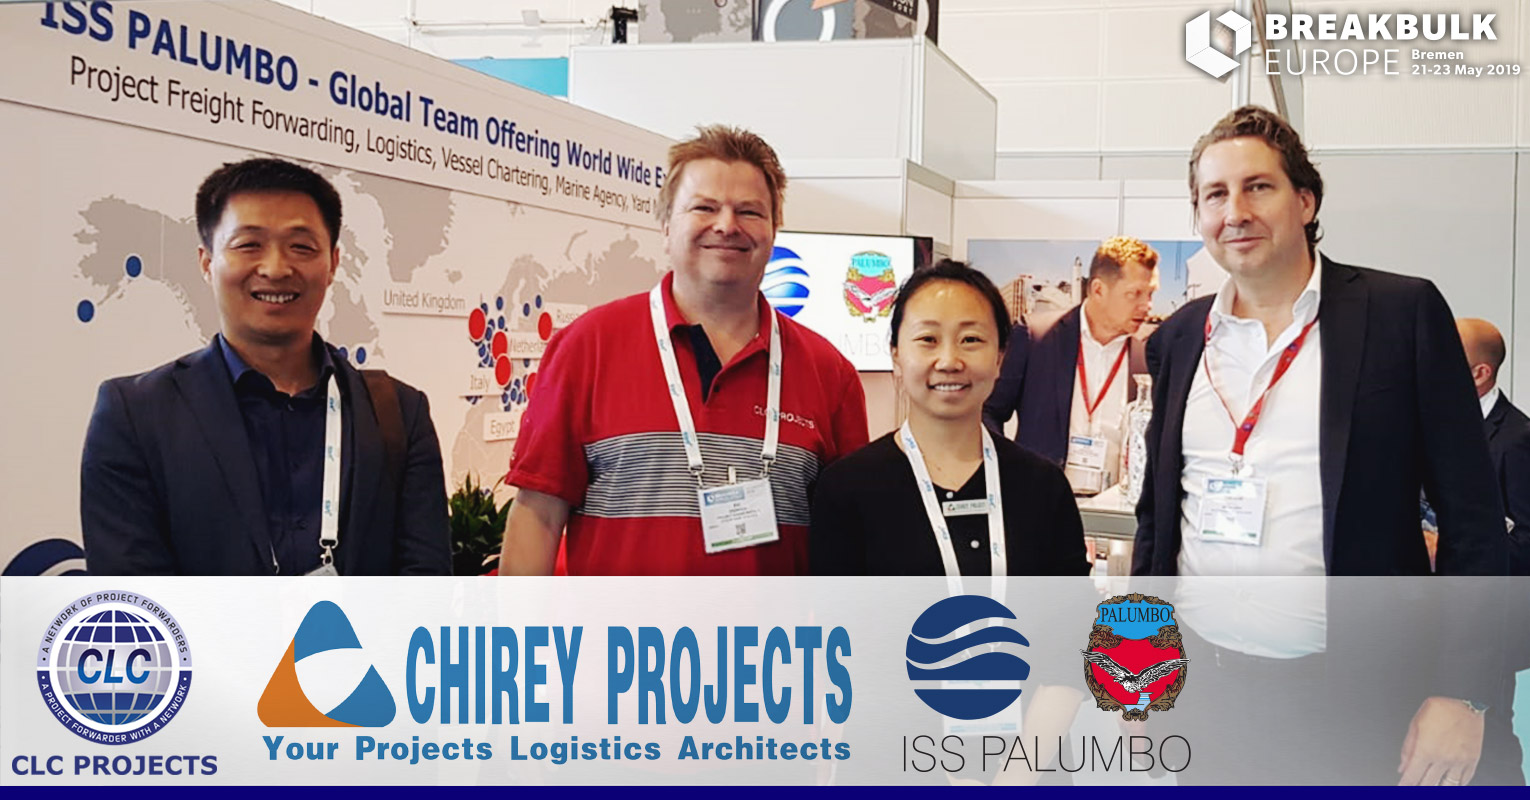 CLC-Projects-with-Chirey-Projects-and-ISS-Palumbo-at-Breakbulk-Europe-in-Bremen-800px